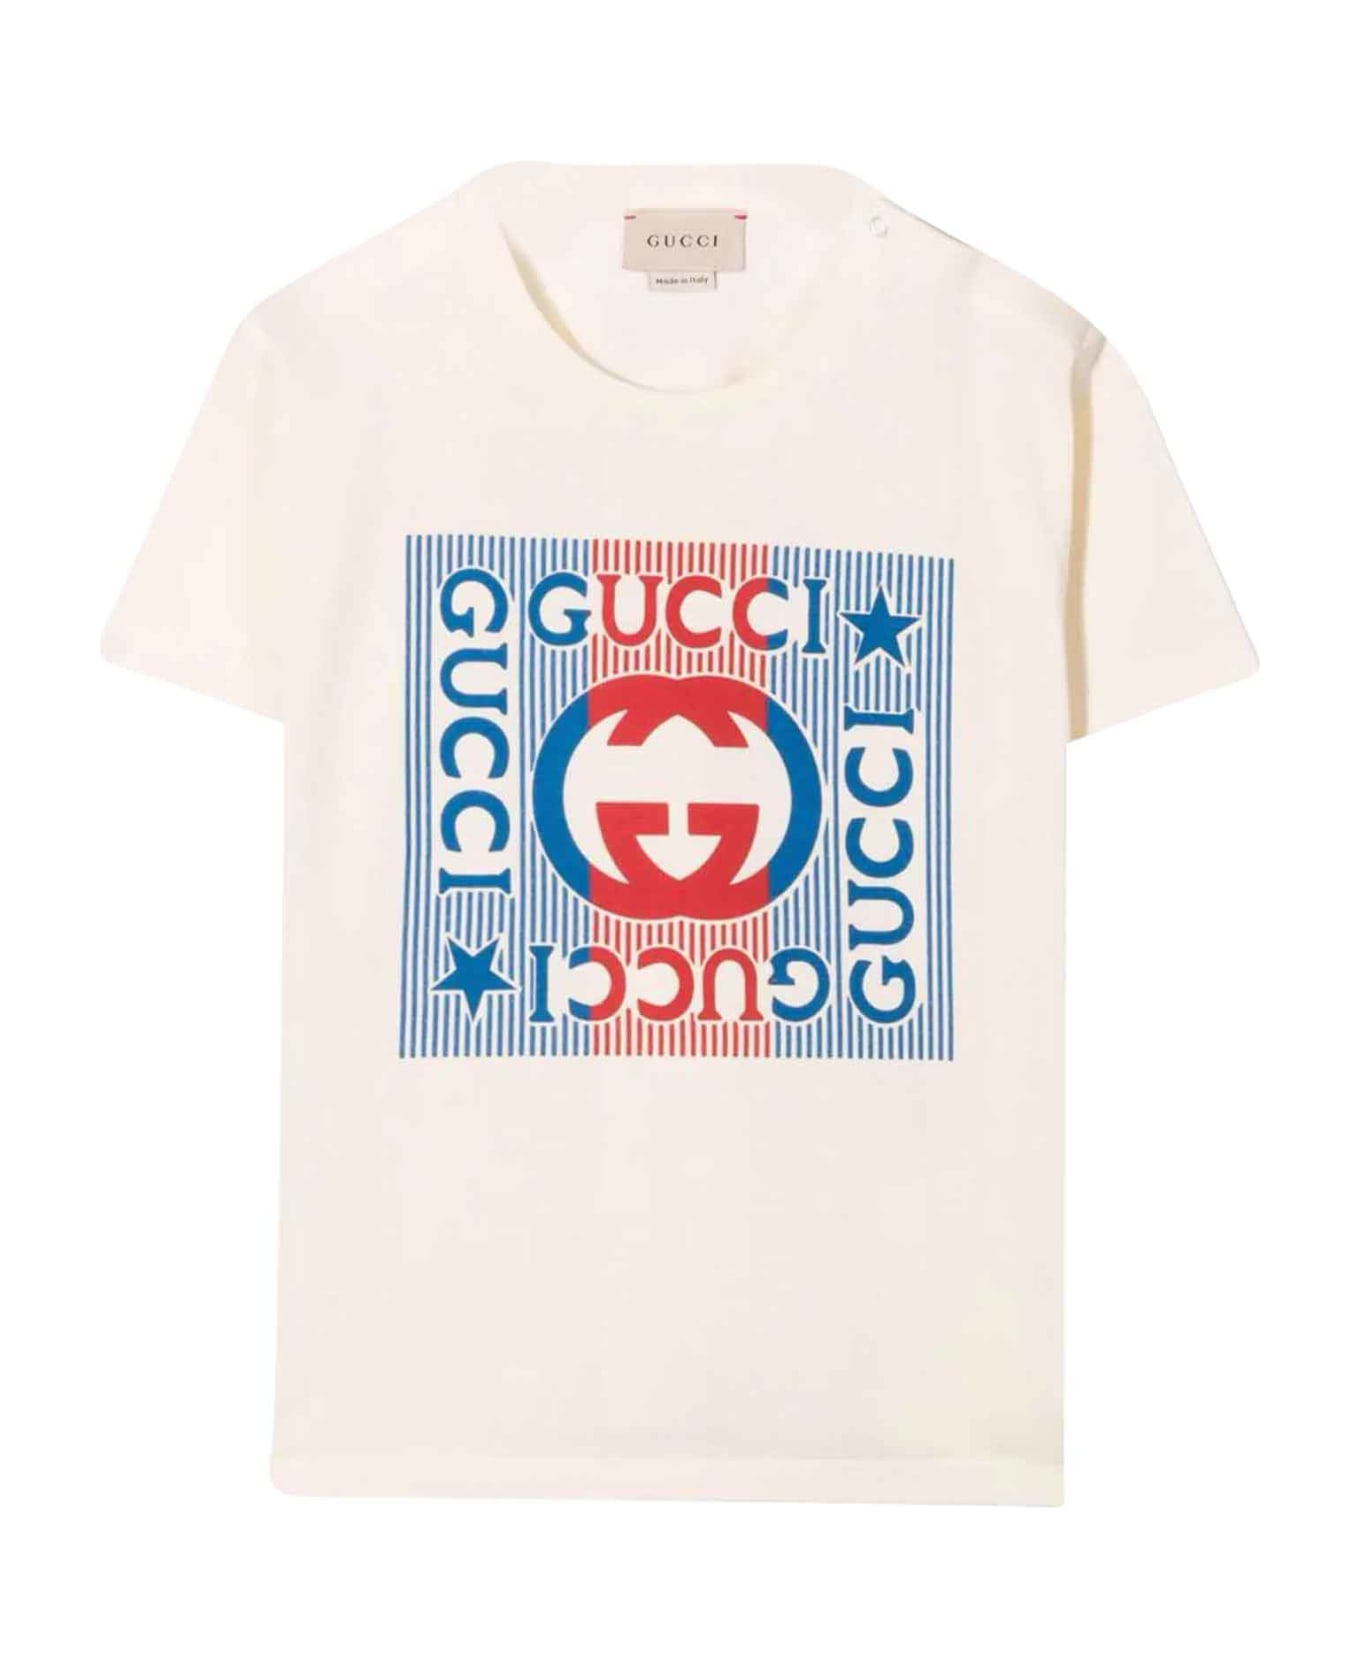 Gucci White T-shirt With Frontal Print - Crema